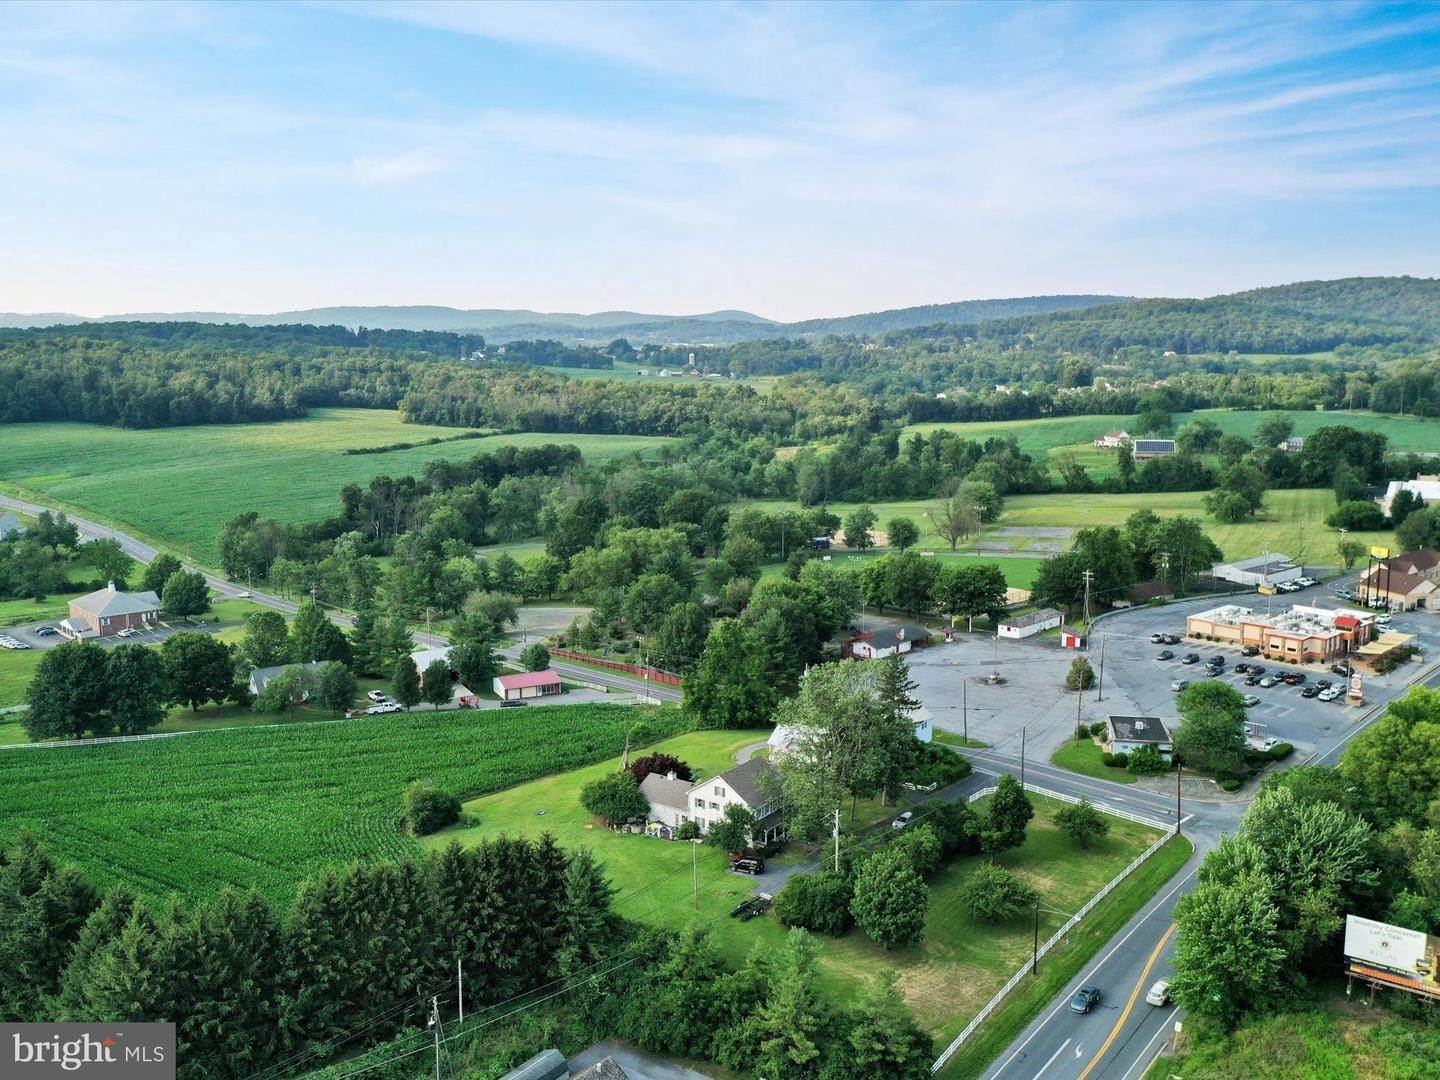 4. Land for Sale at 20 HILL / RT. 272 Road Denver, Pennsylvania 17517 United States